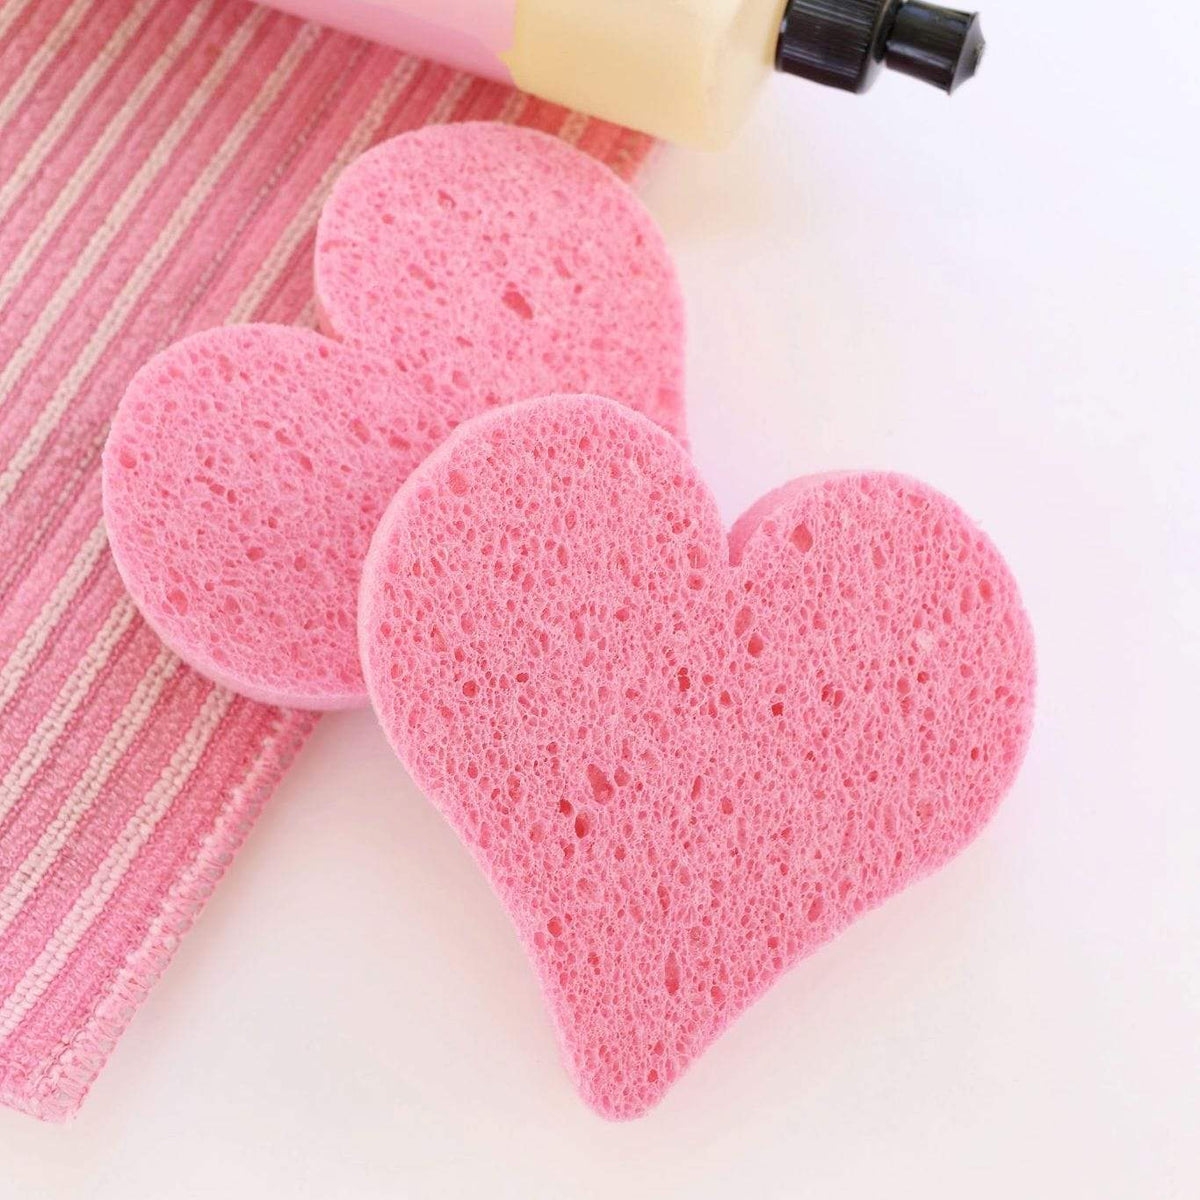 Intrinsics Pink Heart Compressed Sponges for Sale - 75 Count